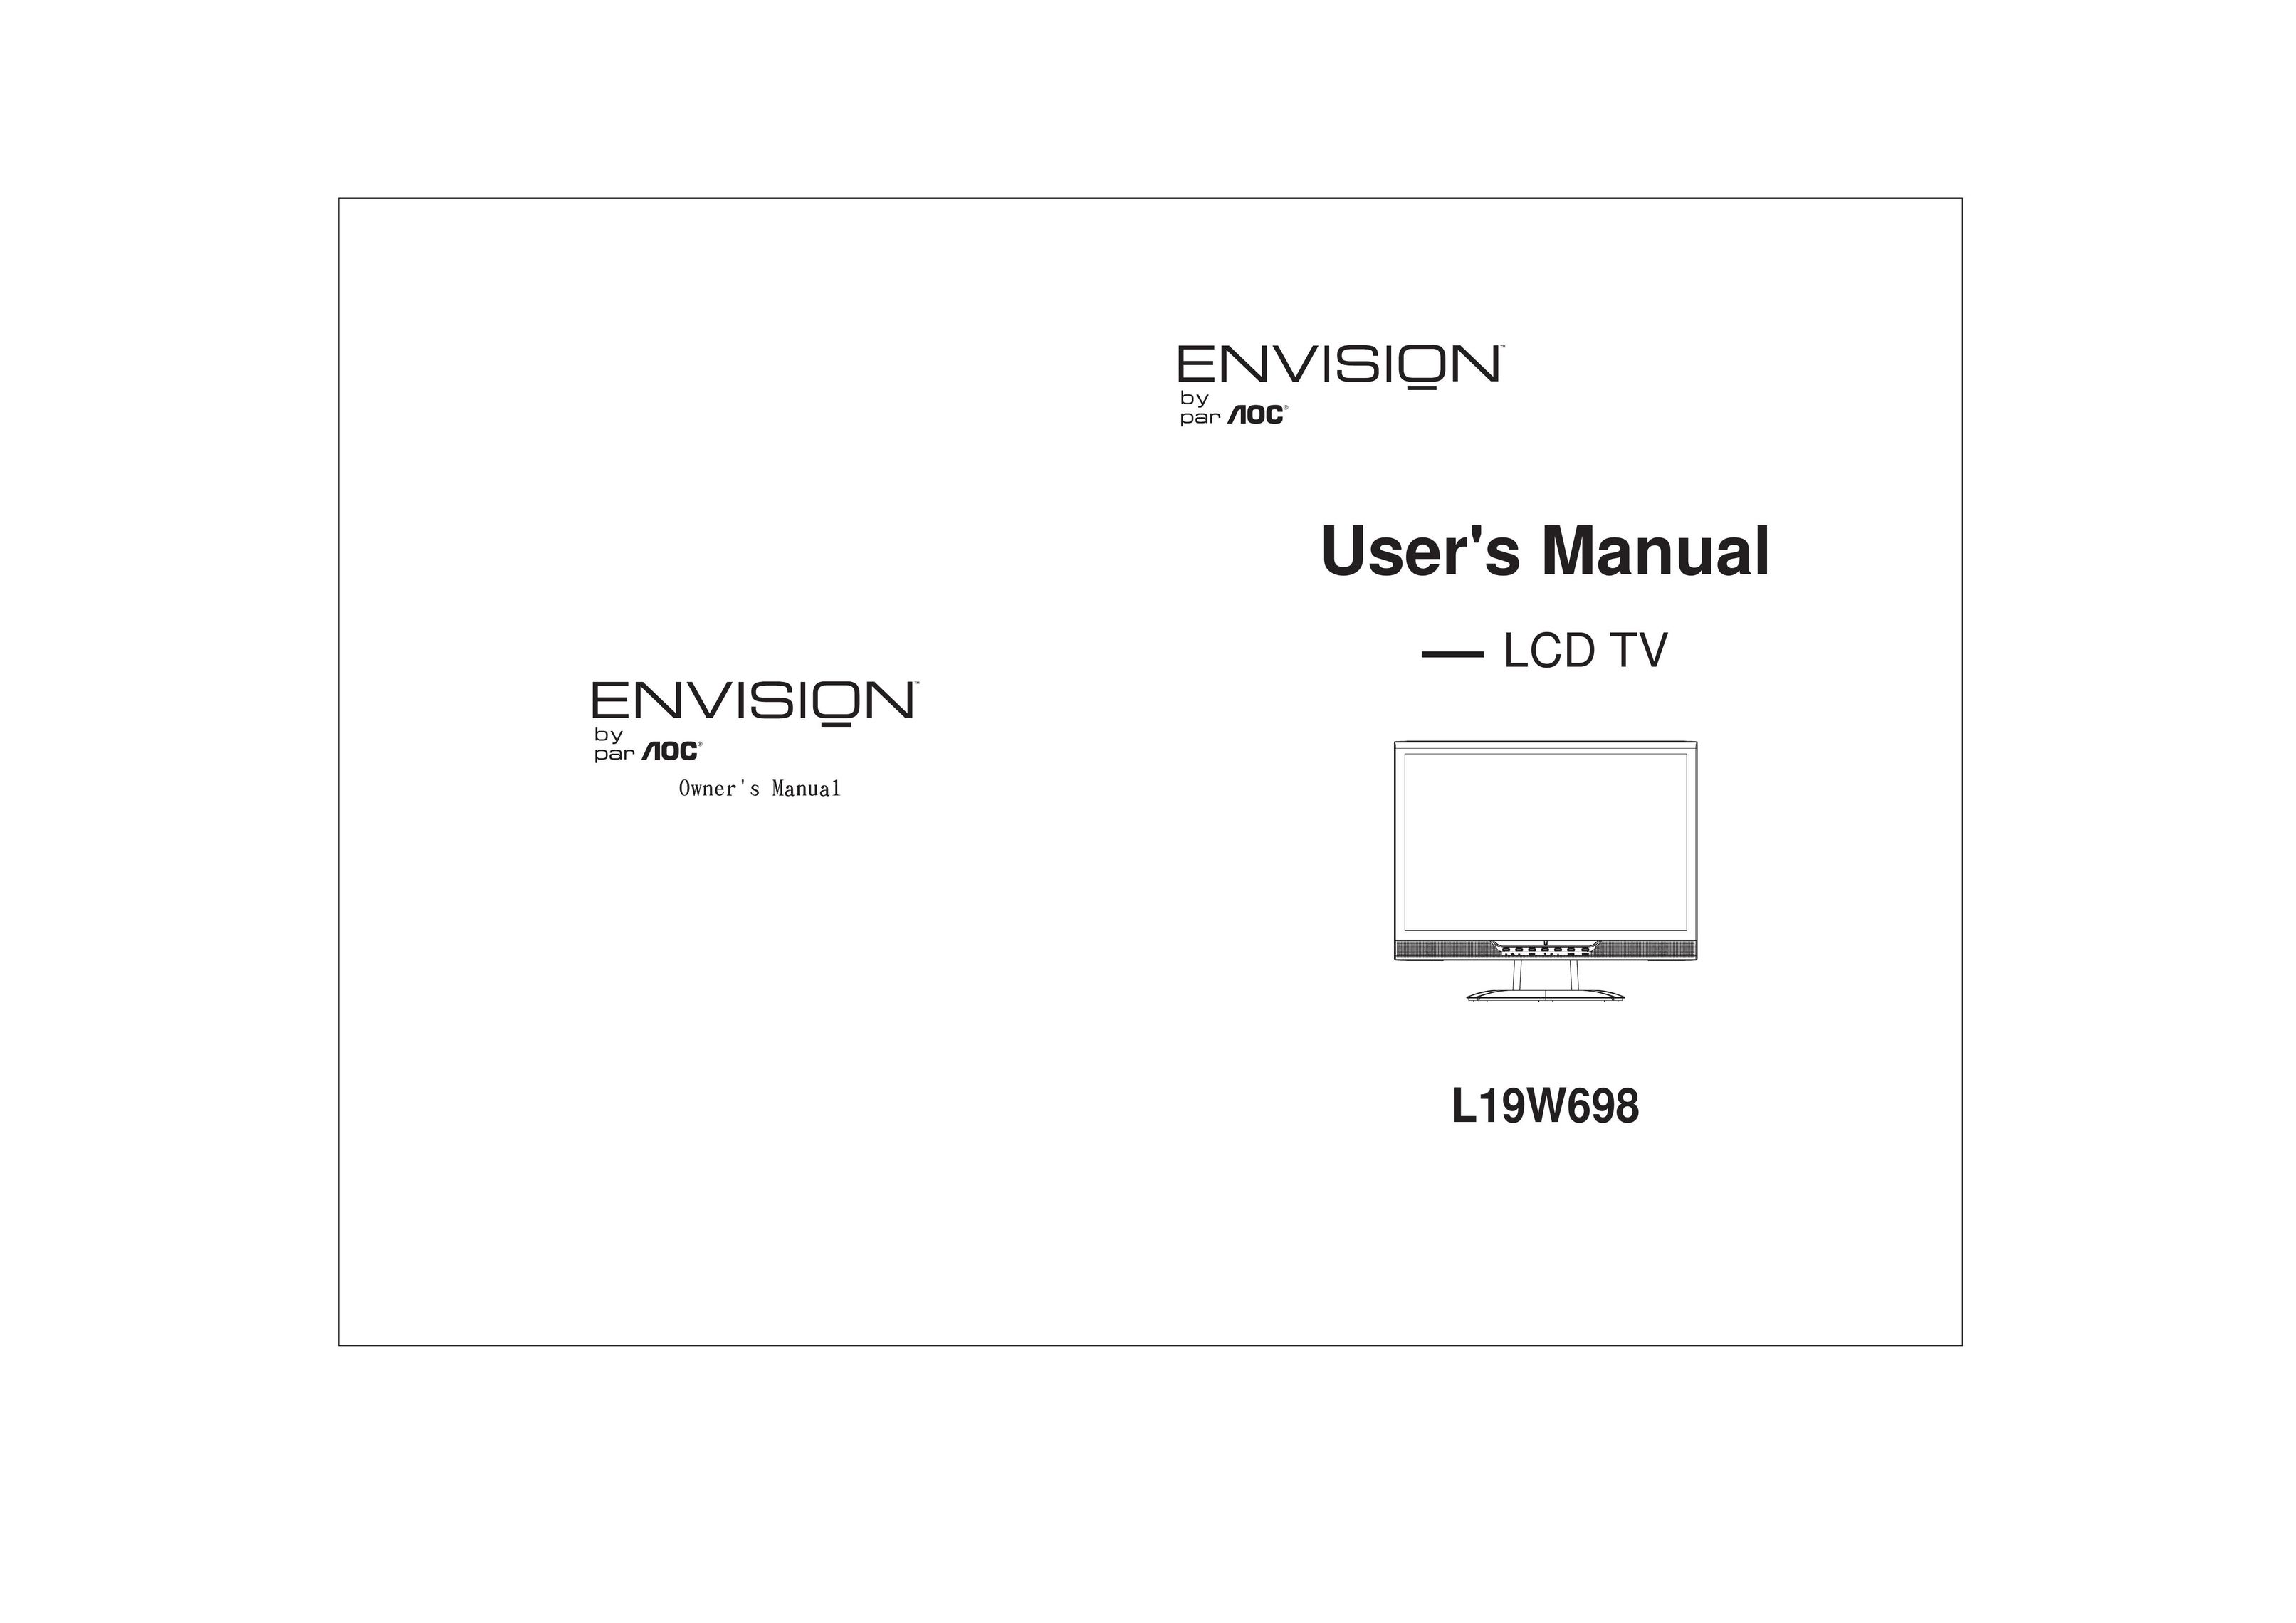 Envision Peripherals L19W698 Flat Panel Television User Manual